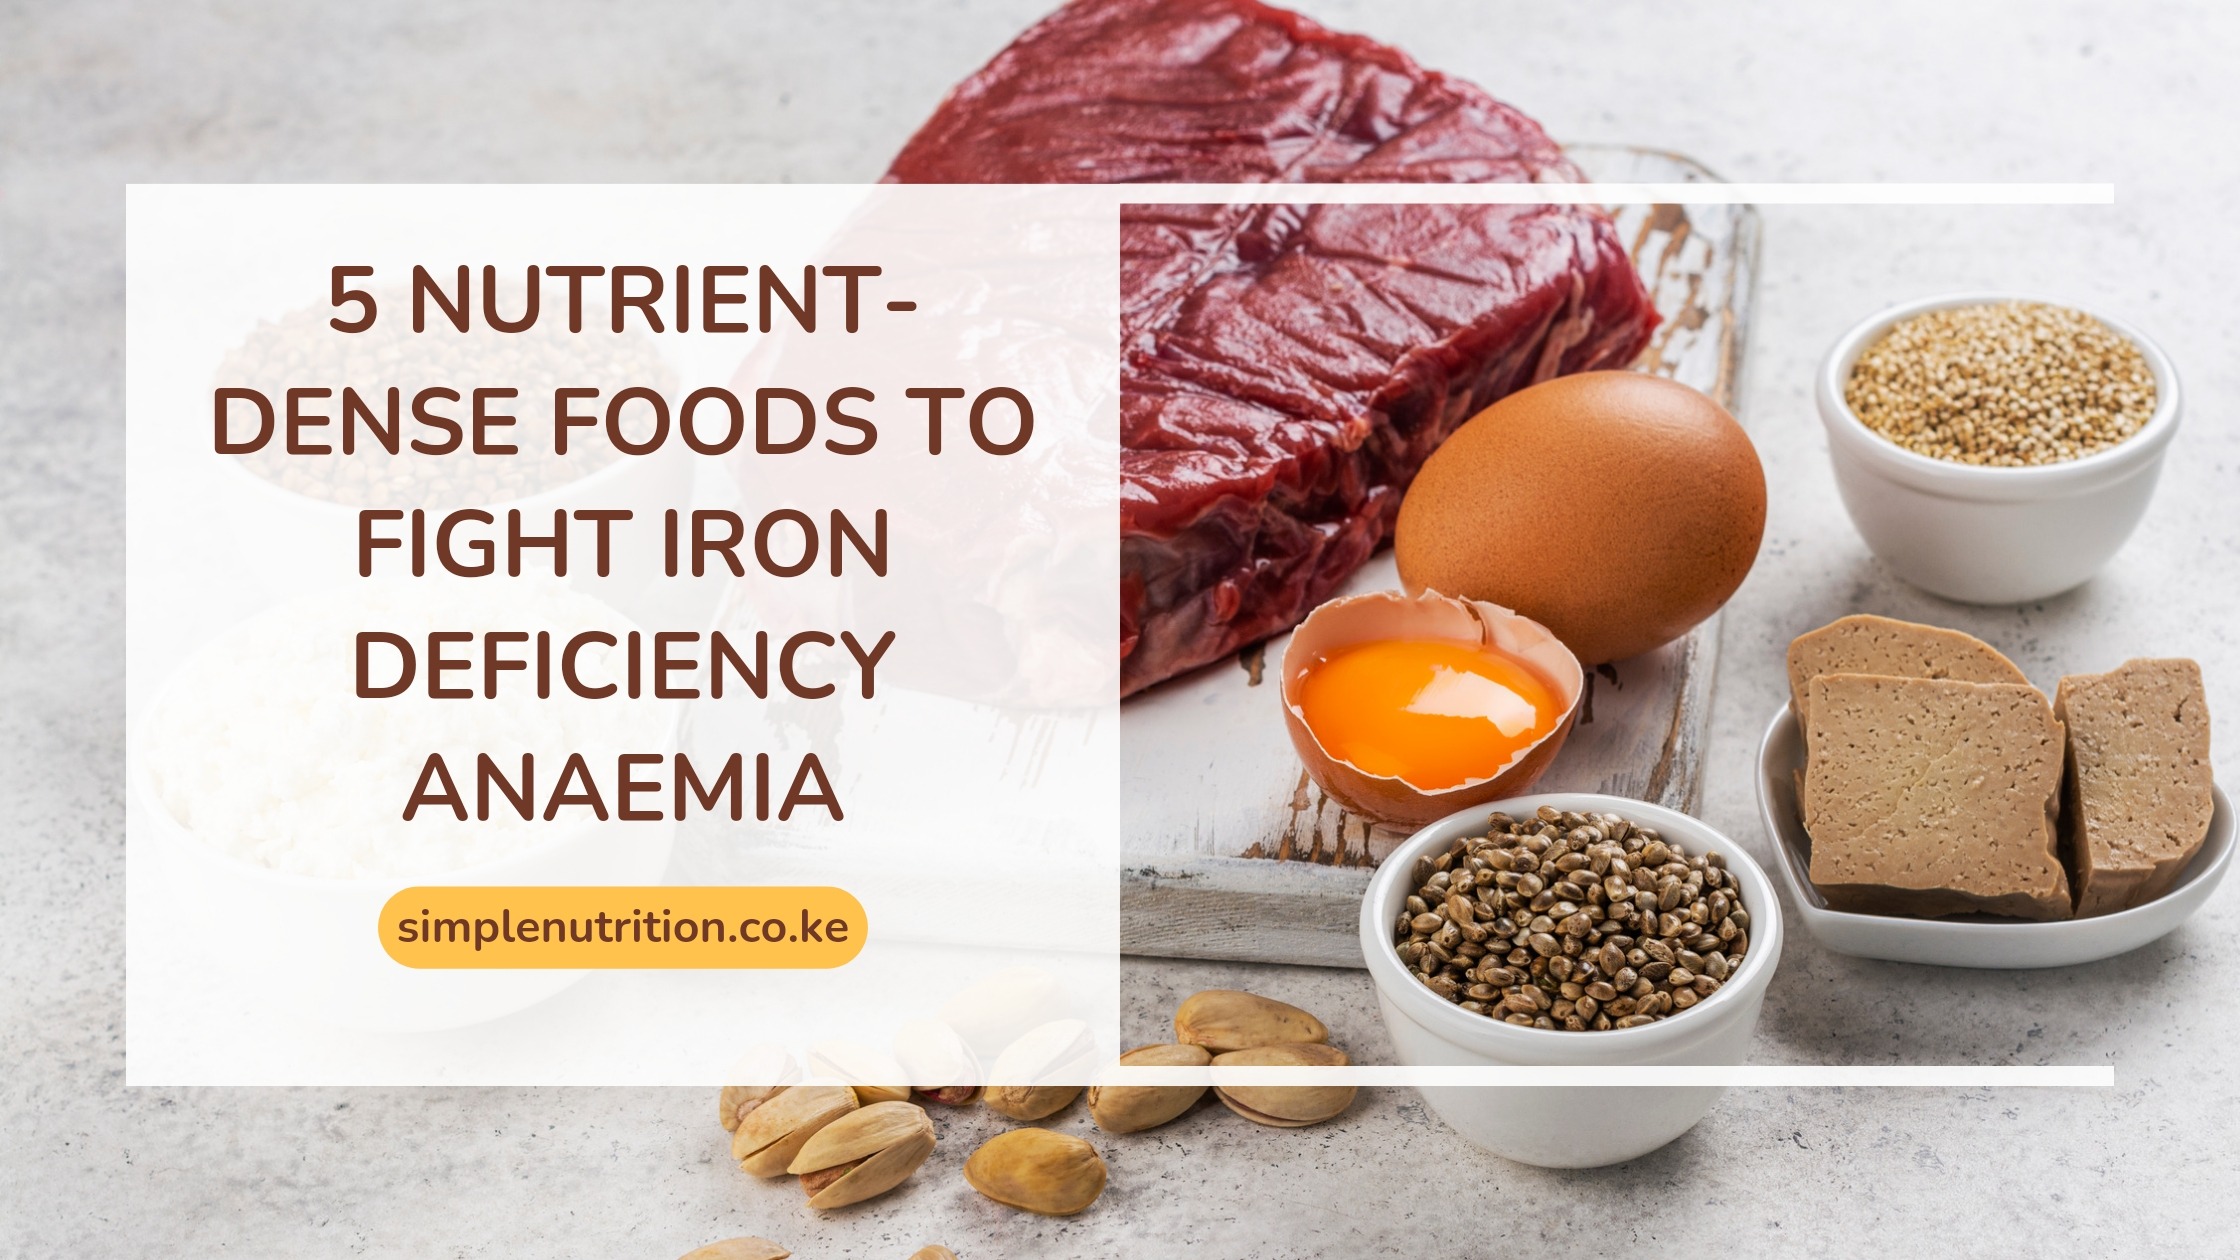 Here are 5 nutrient-dense foods that can help manage iron deficiency anemia.